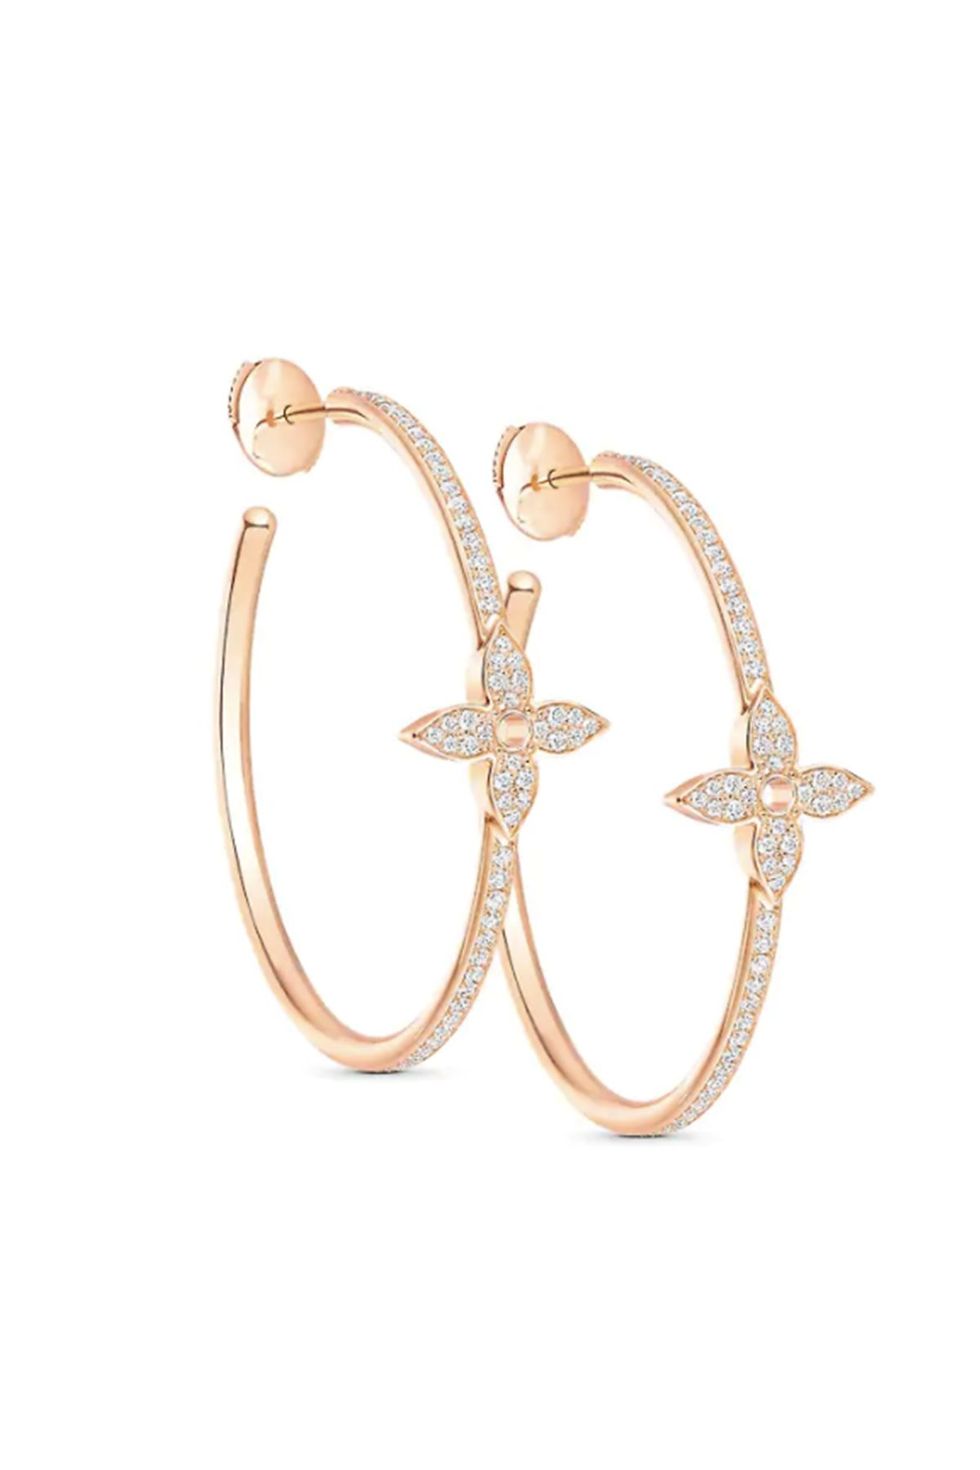 Idylle Blossom Hoops, Pink Gold and Diamonds